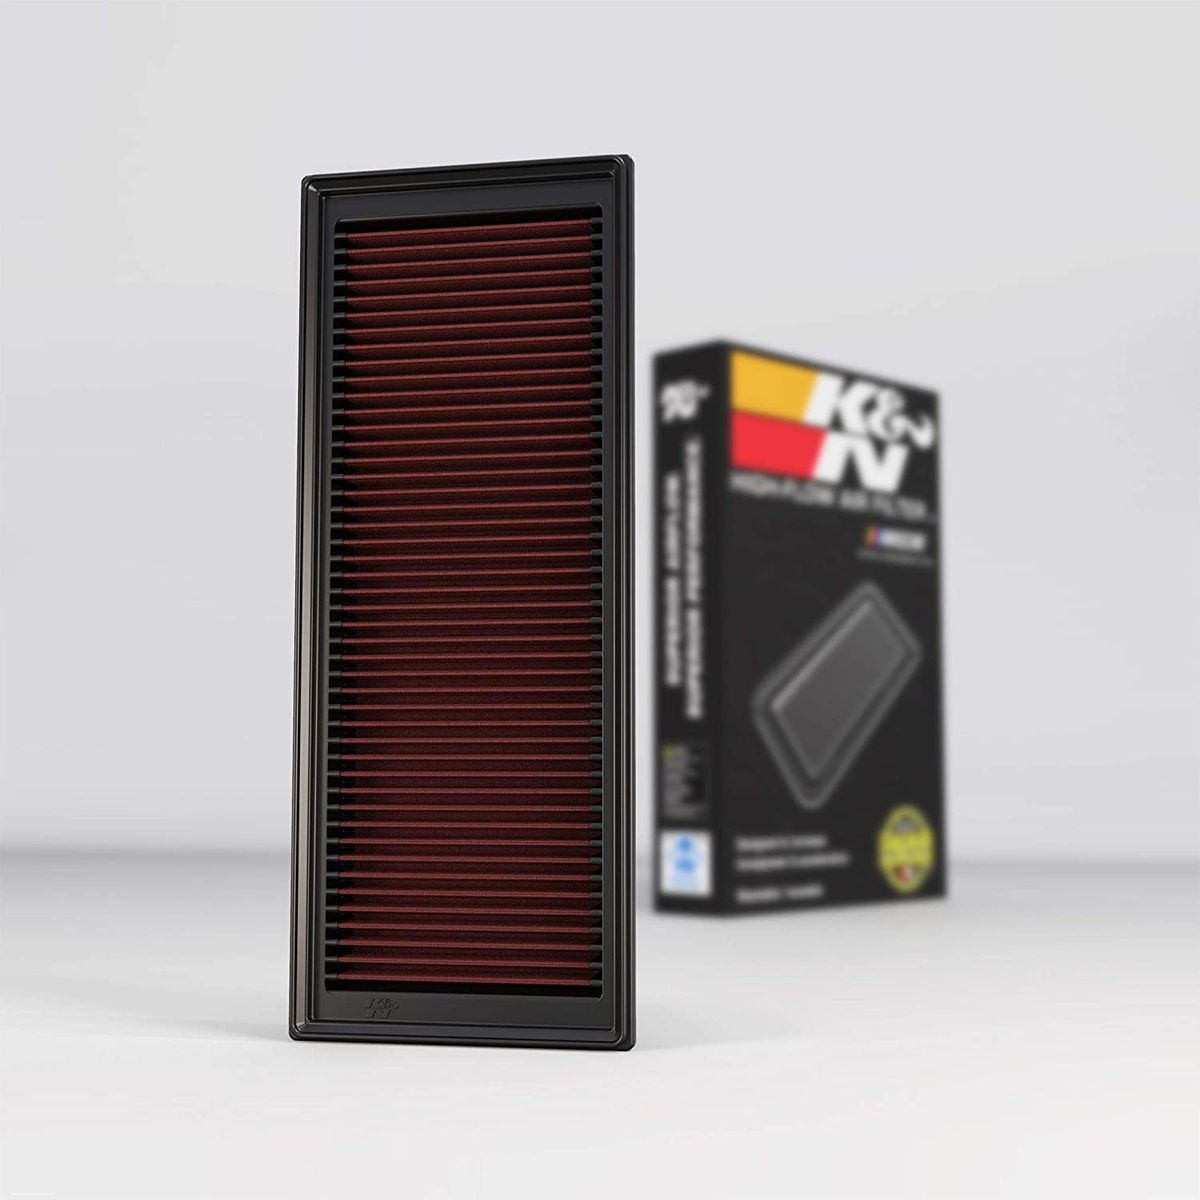  K&N Engine Air Filter: Reusable, Clean Every 75,000 Miles,  Washable, Replacement Car Air Filter: Compatible with 2003-2019  Volswagen/Audi/Seat/Skoda (Beetle, Caddy, Passat, Jetta, Tiguan, Q3),  33-2865 : Automotive